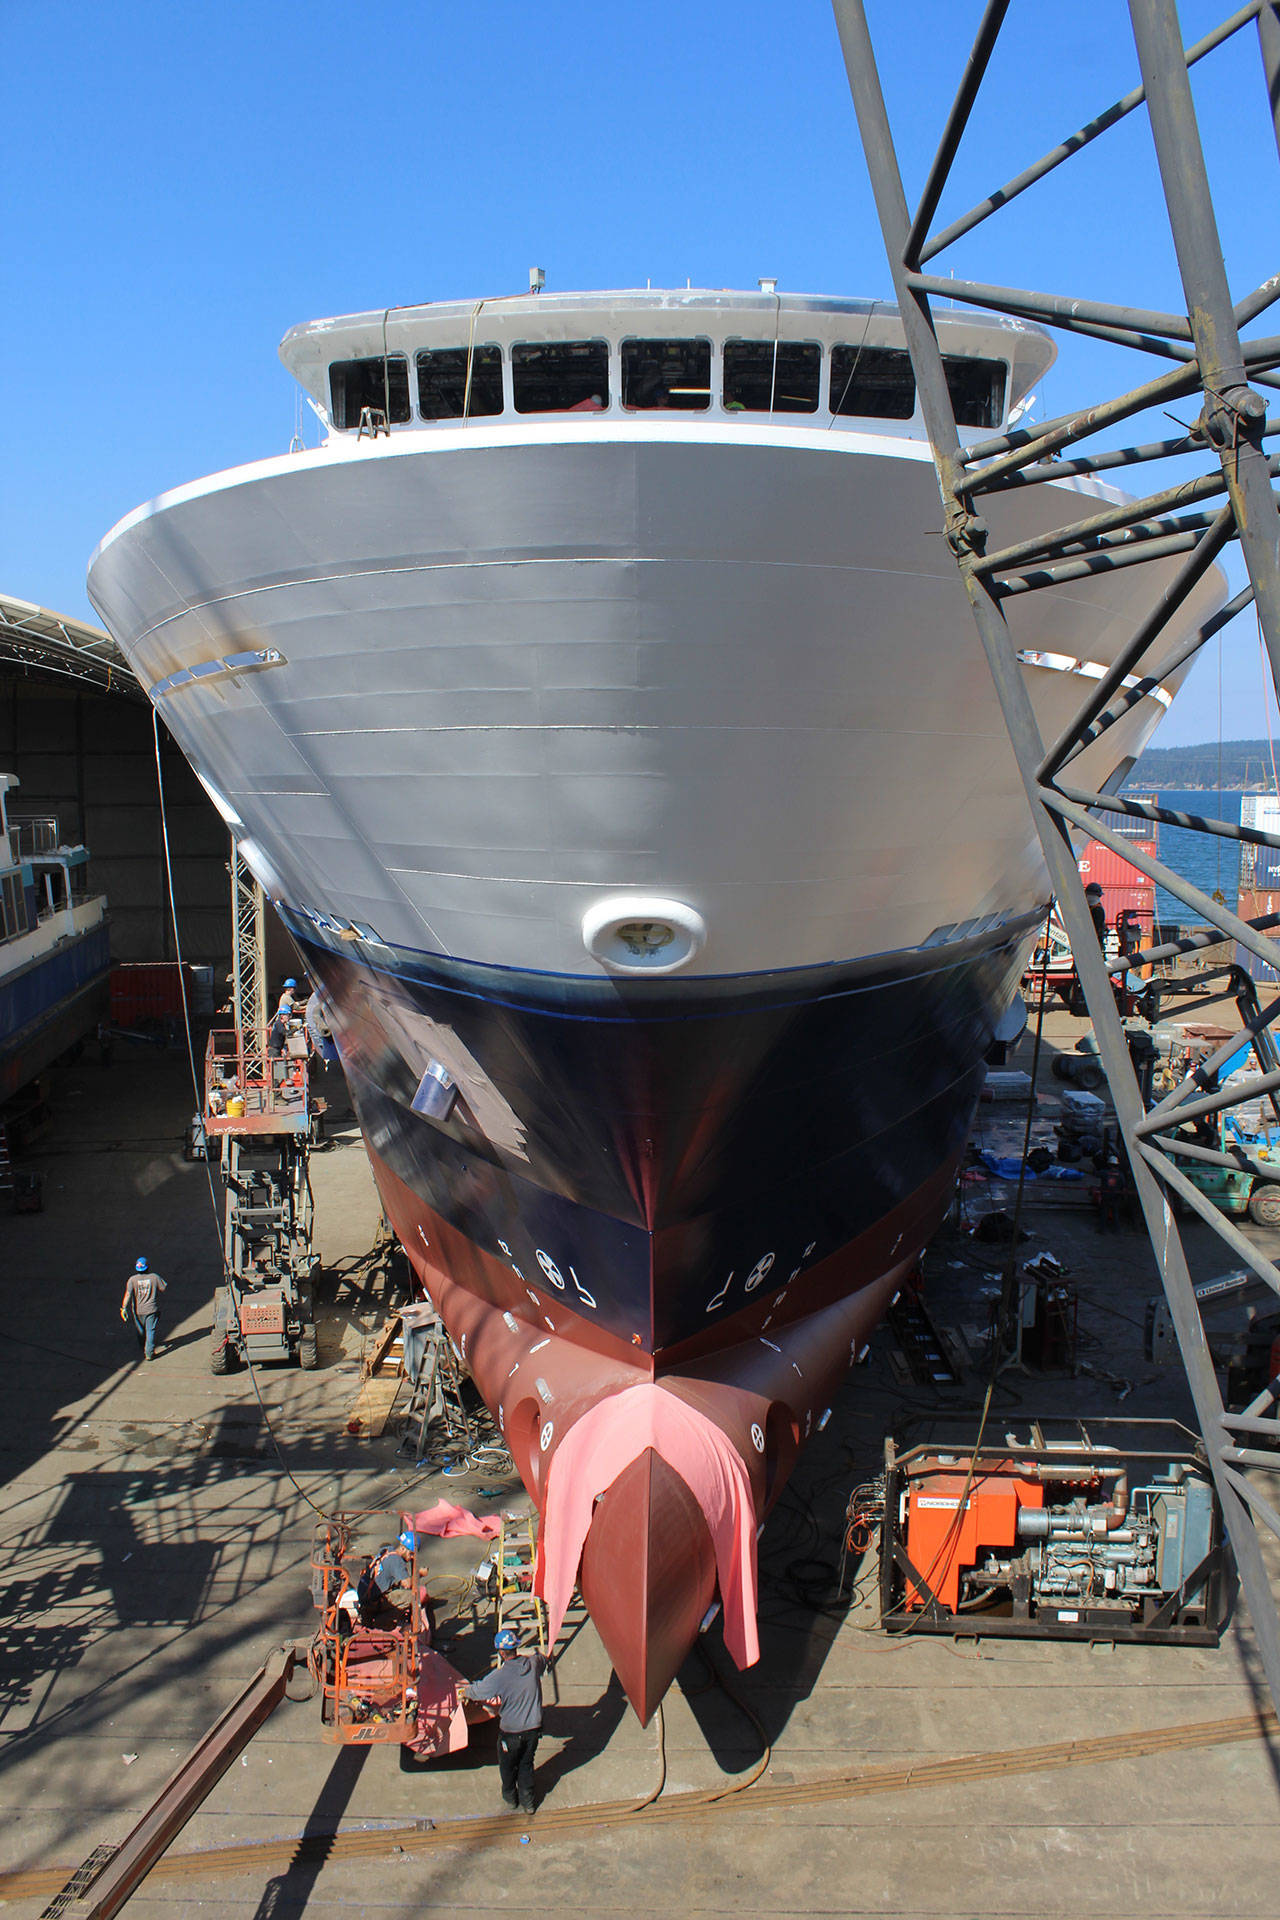 A “mini” cruise ship is being launched this weekend at Holmes Harbor after being built at Nichols Brothers Boat Builders. It’s the second 100-passenger vessel built for Lindblad Expeditions, an adventure travel company affiliated with National Geographic. (Photo by Patricia Guthrie/Whidbey News Group)